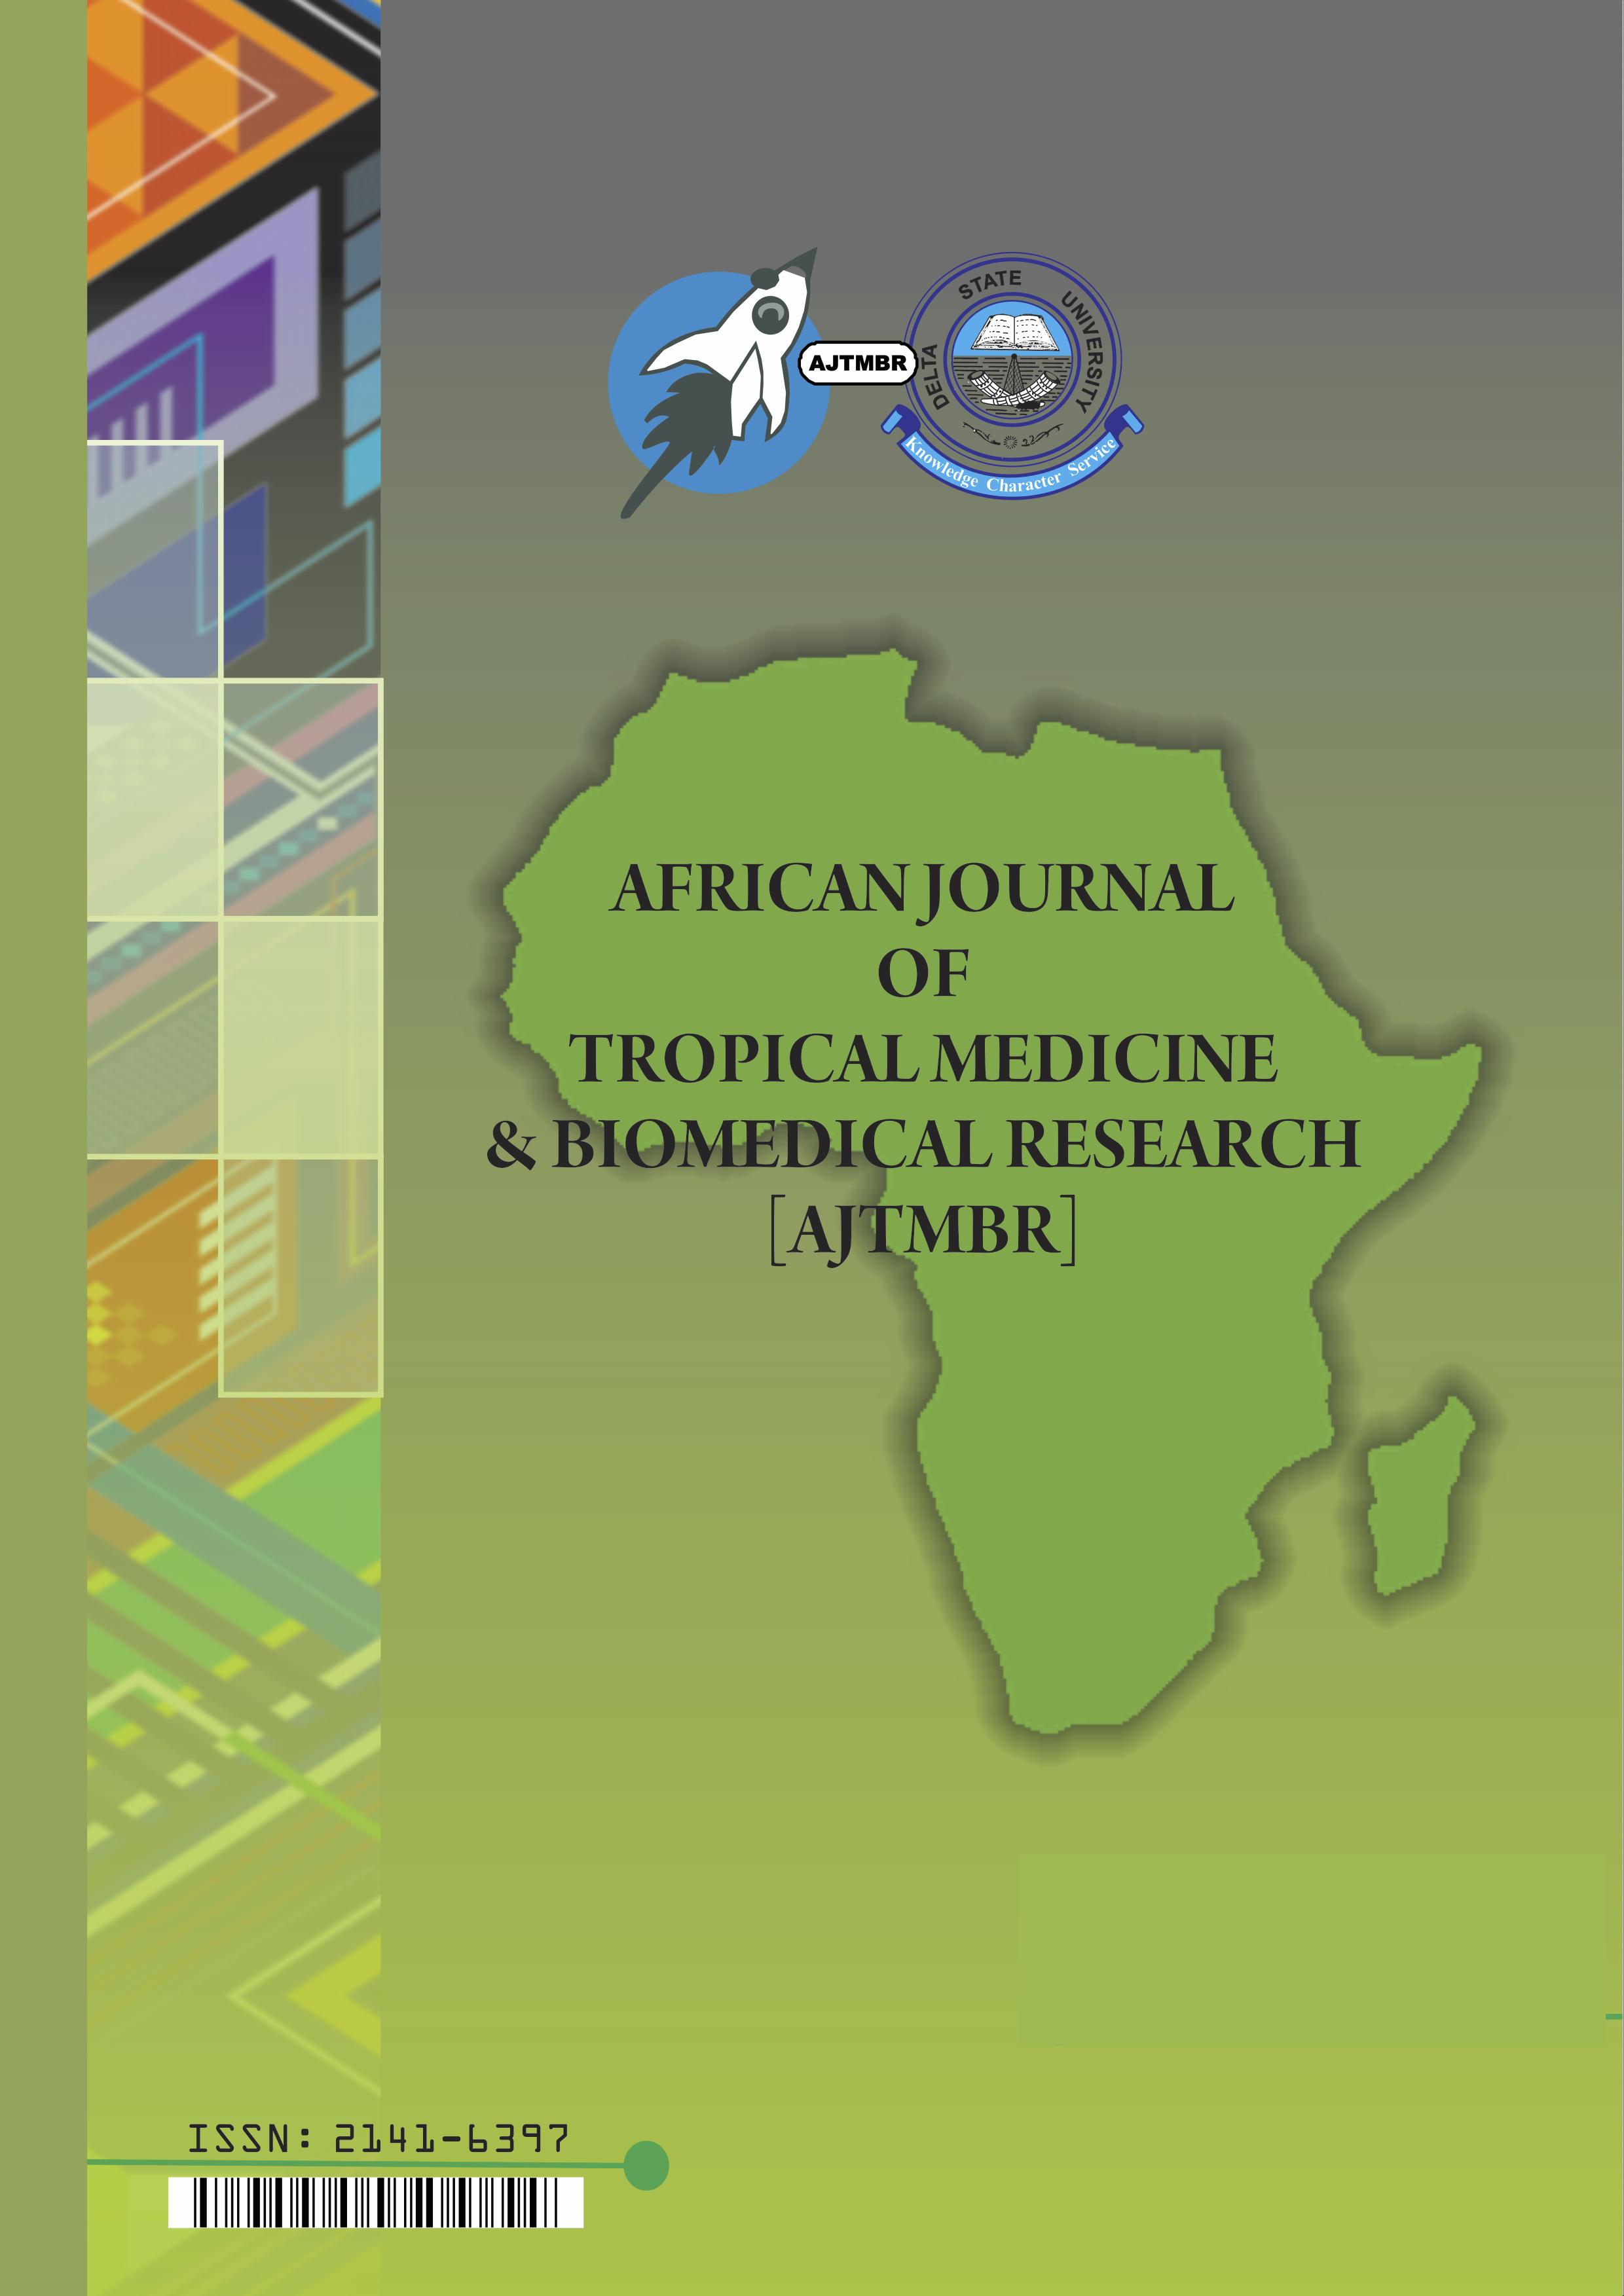 					View Vol. 4 No. 2: African Journal of Tropical Medicine and Biomedical Research; September 2019
				